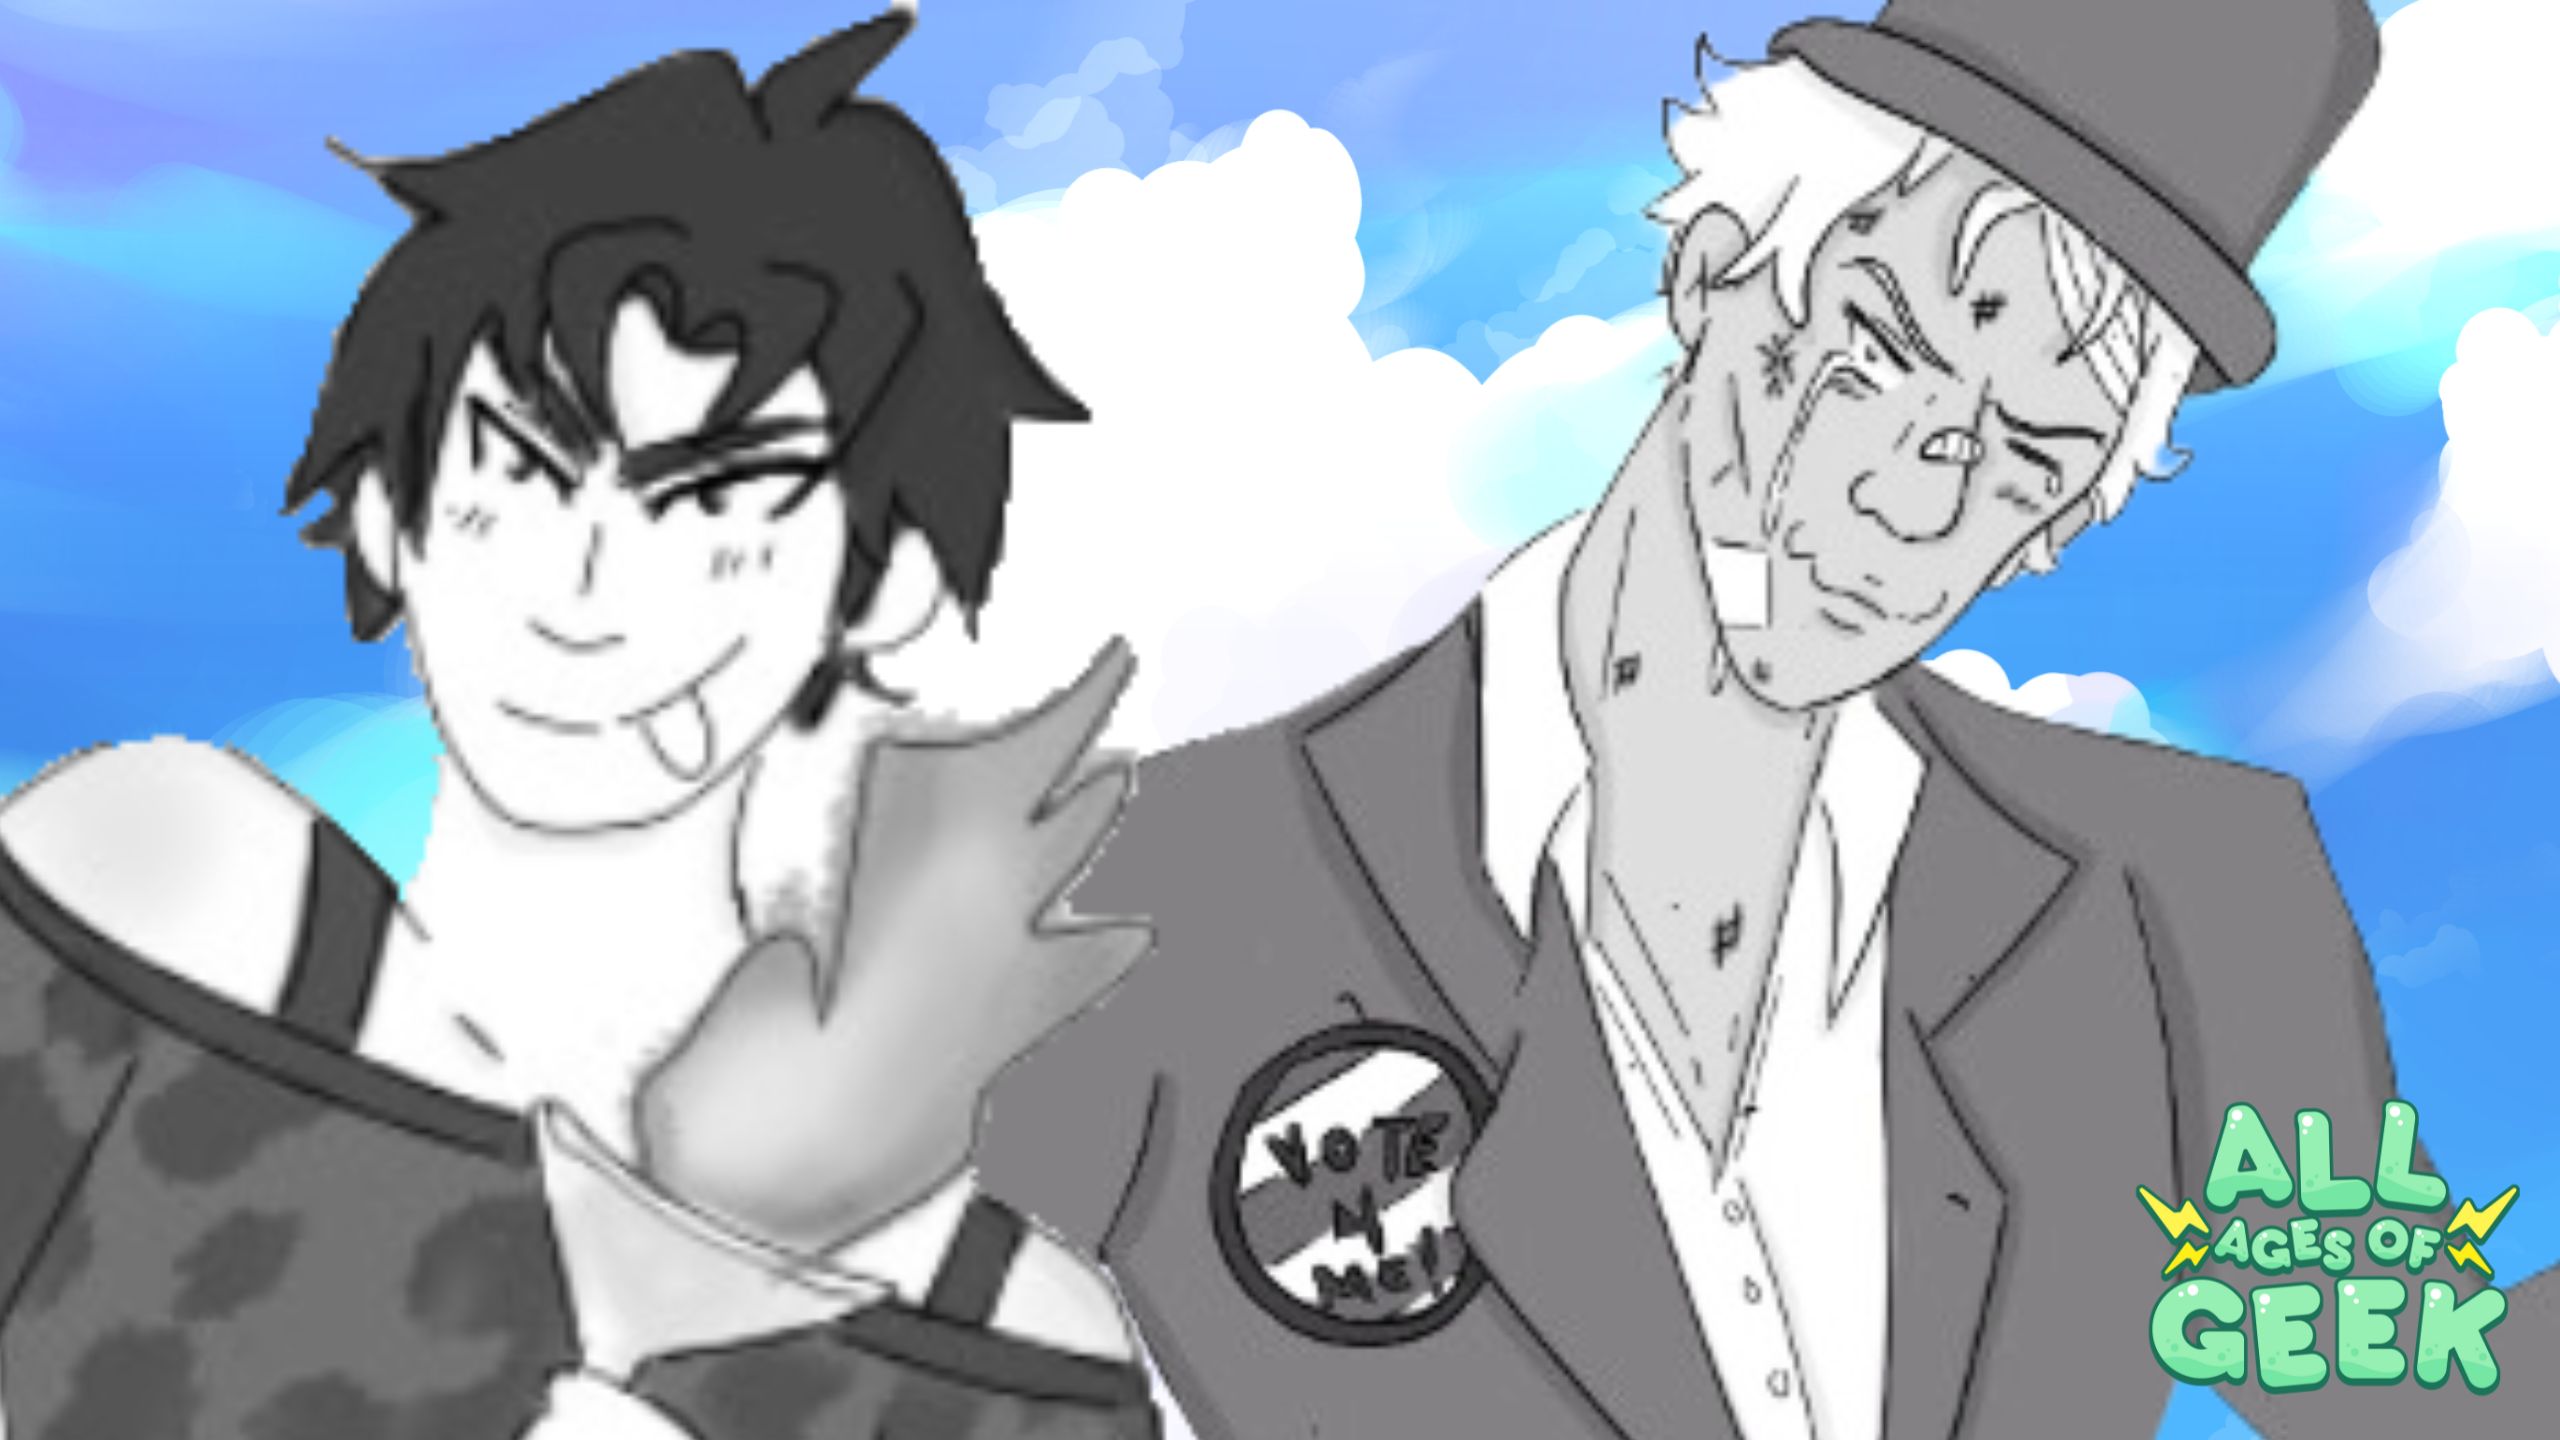 A black and white sketch of two characters from "I Married a Monster on a Hill." On the left is Nate, a character with messy hair and a mischievous expression, wearing an off-shoulder top. On the right is Reginald, wearing a suit and a top hat, with a button that reads "Vote 4 Me." Both characters are against a bright blue sky with fluffy clouds. The All Ages of Geek logo is in the bottom right corner.